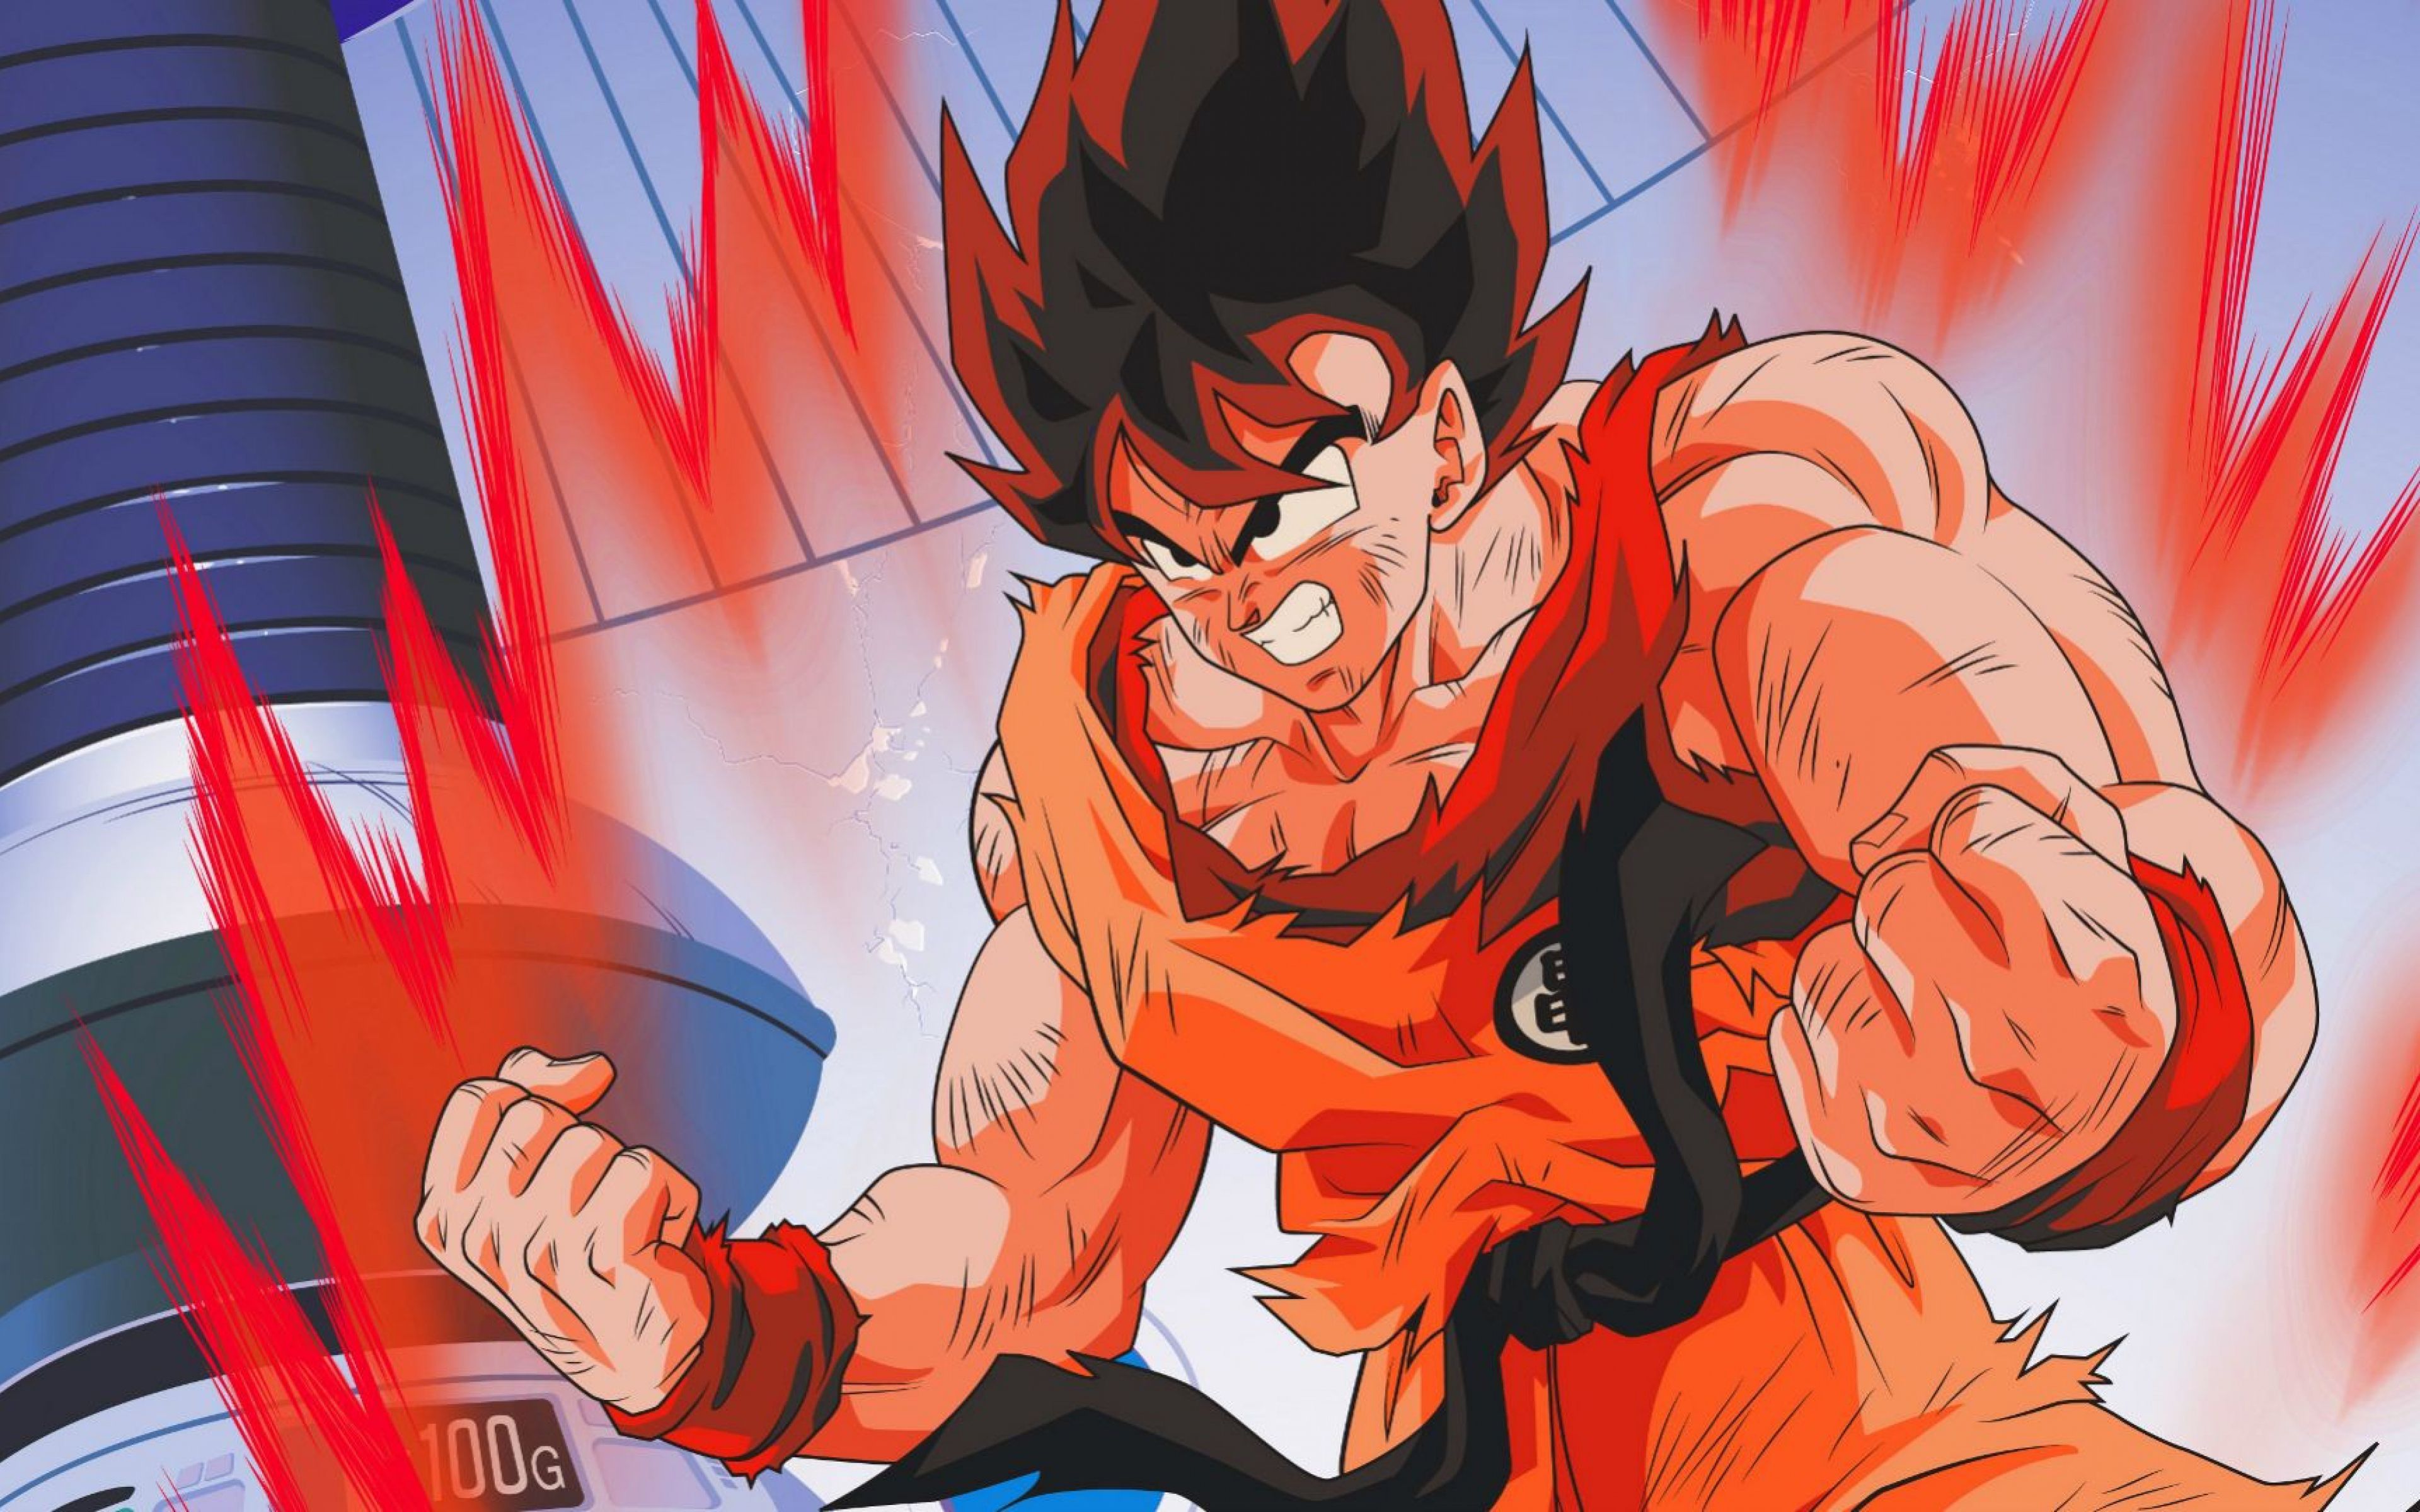 Download Level Up With the 4K Dragon Ball Z PC Wallpaper